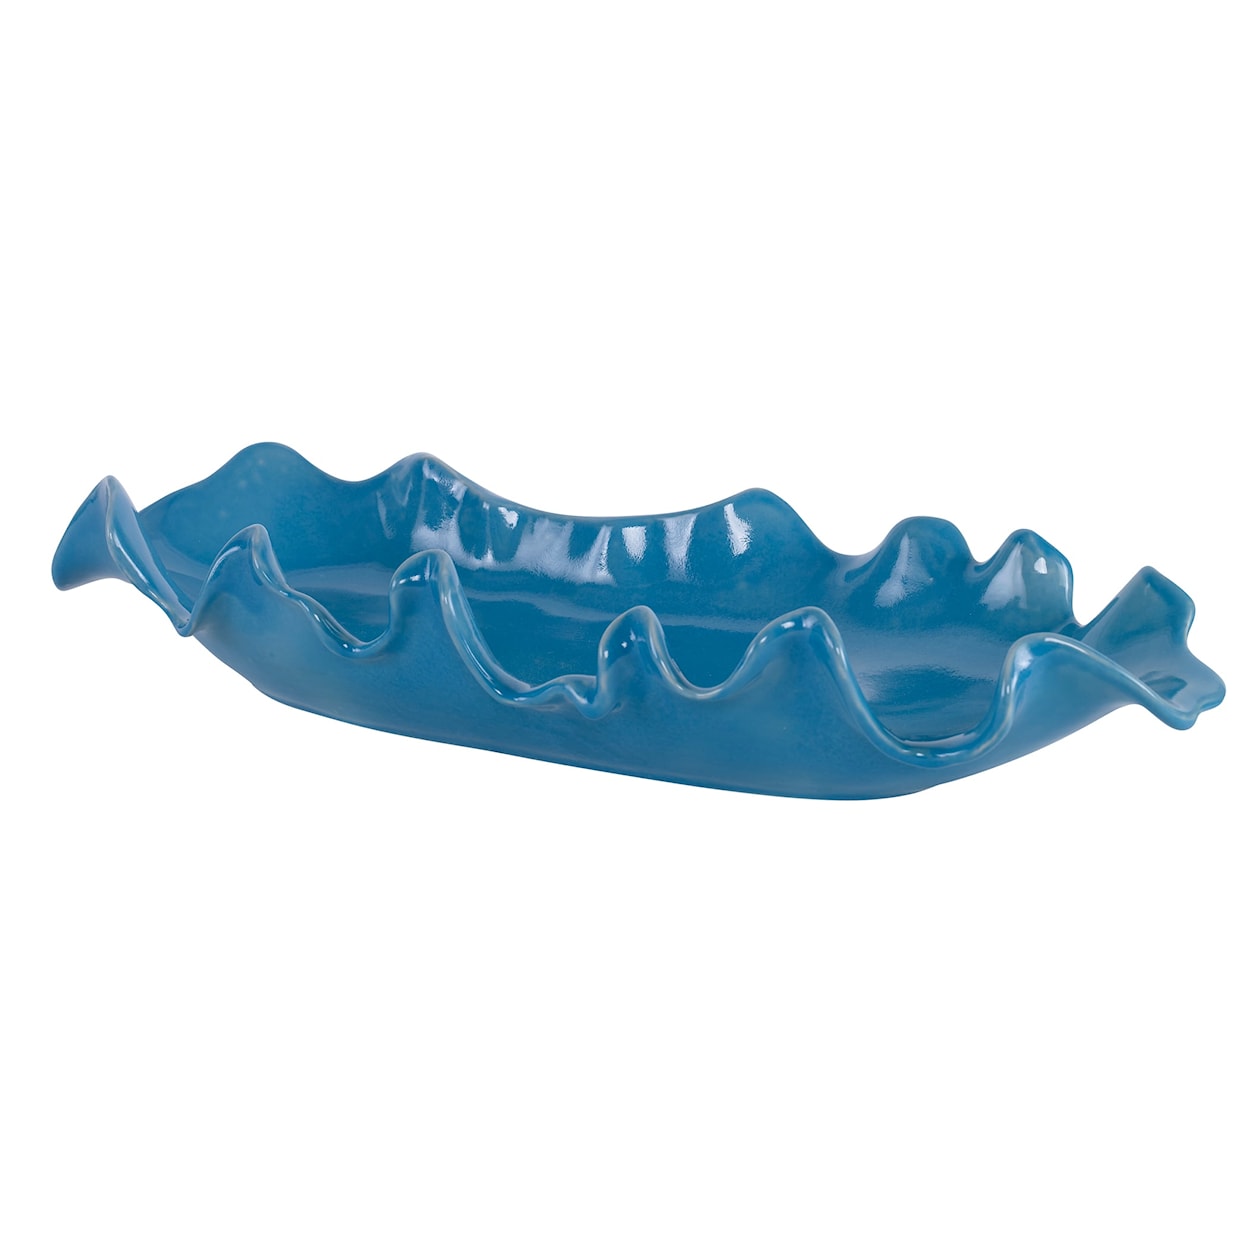 Uttermost Ruffled Feathers Ruffled Feathers Blue Bowl